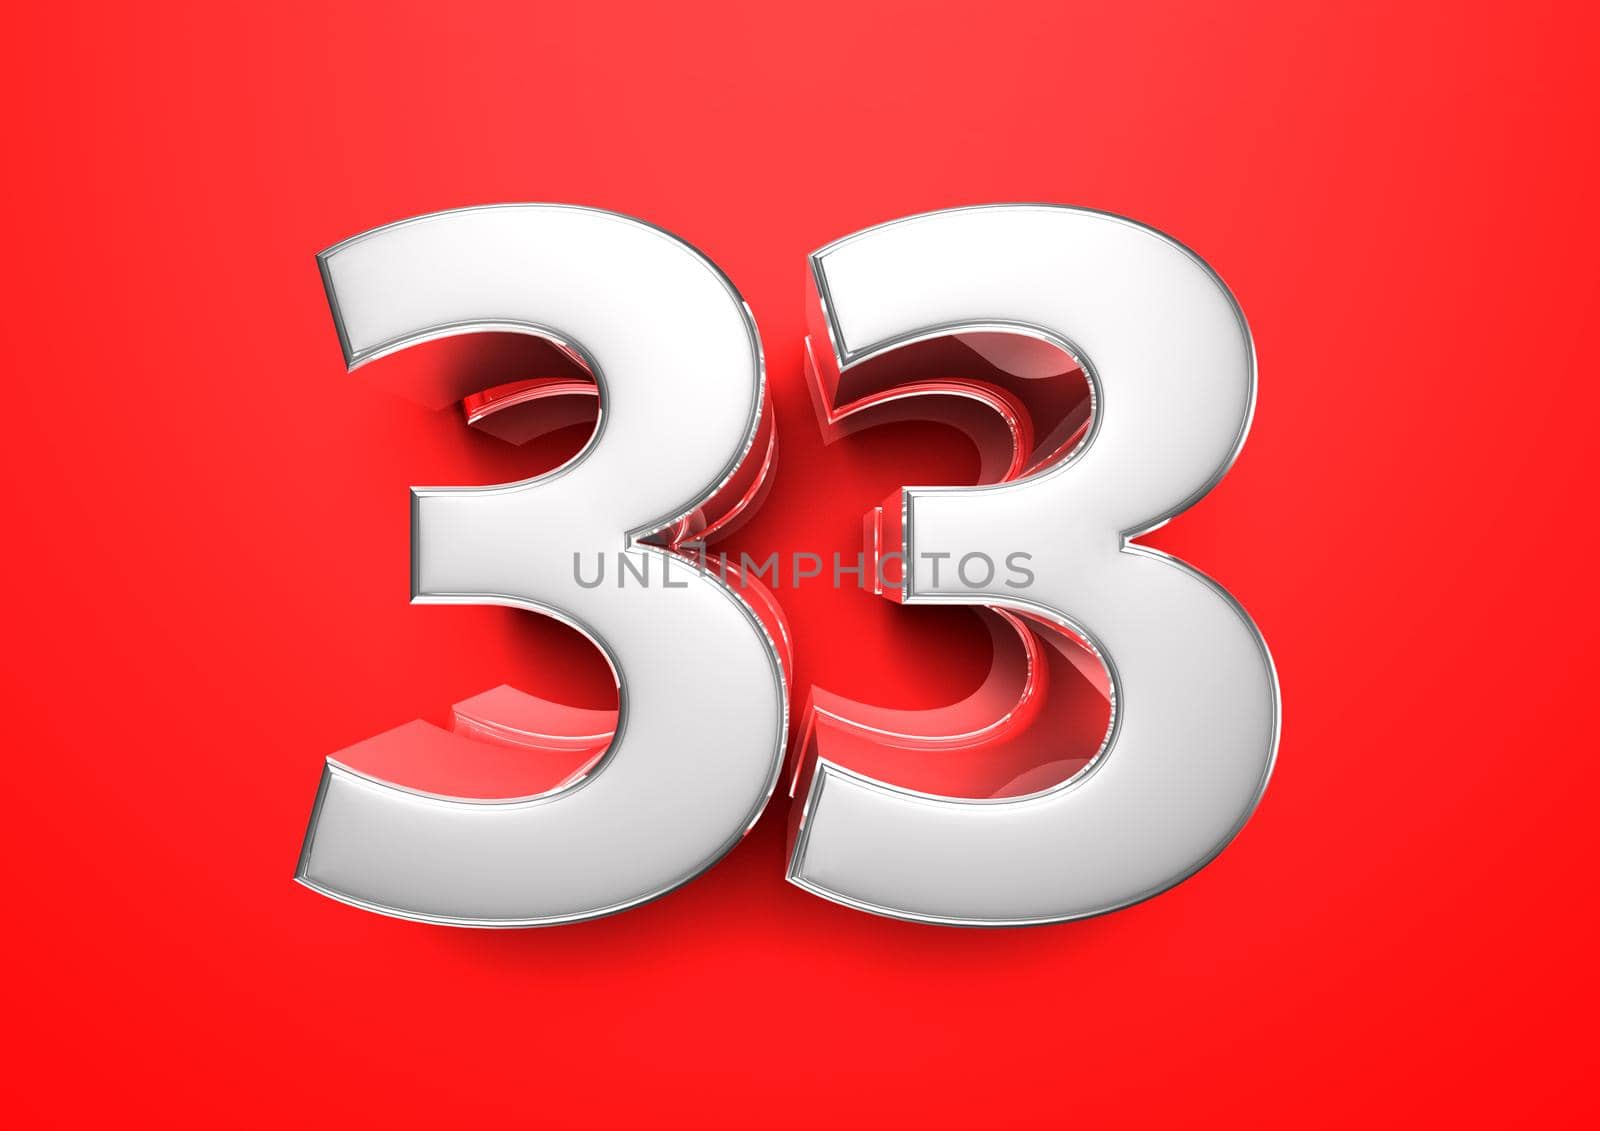 Price tag 33. Anniversary 33. Number 33 3D illustration on a red background. by thitimontoyai